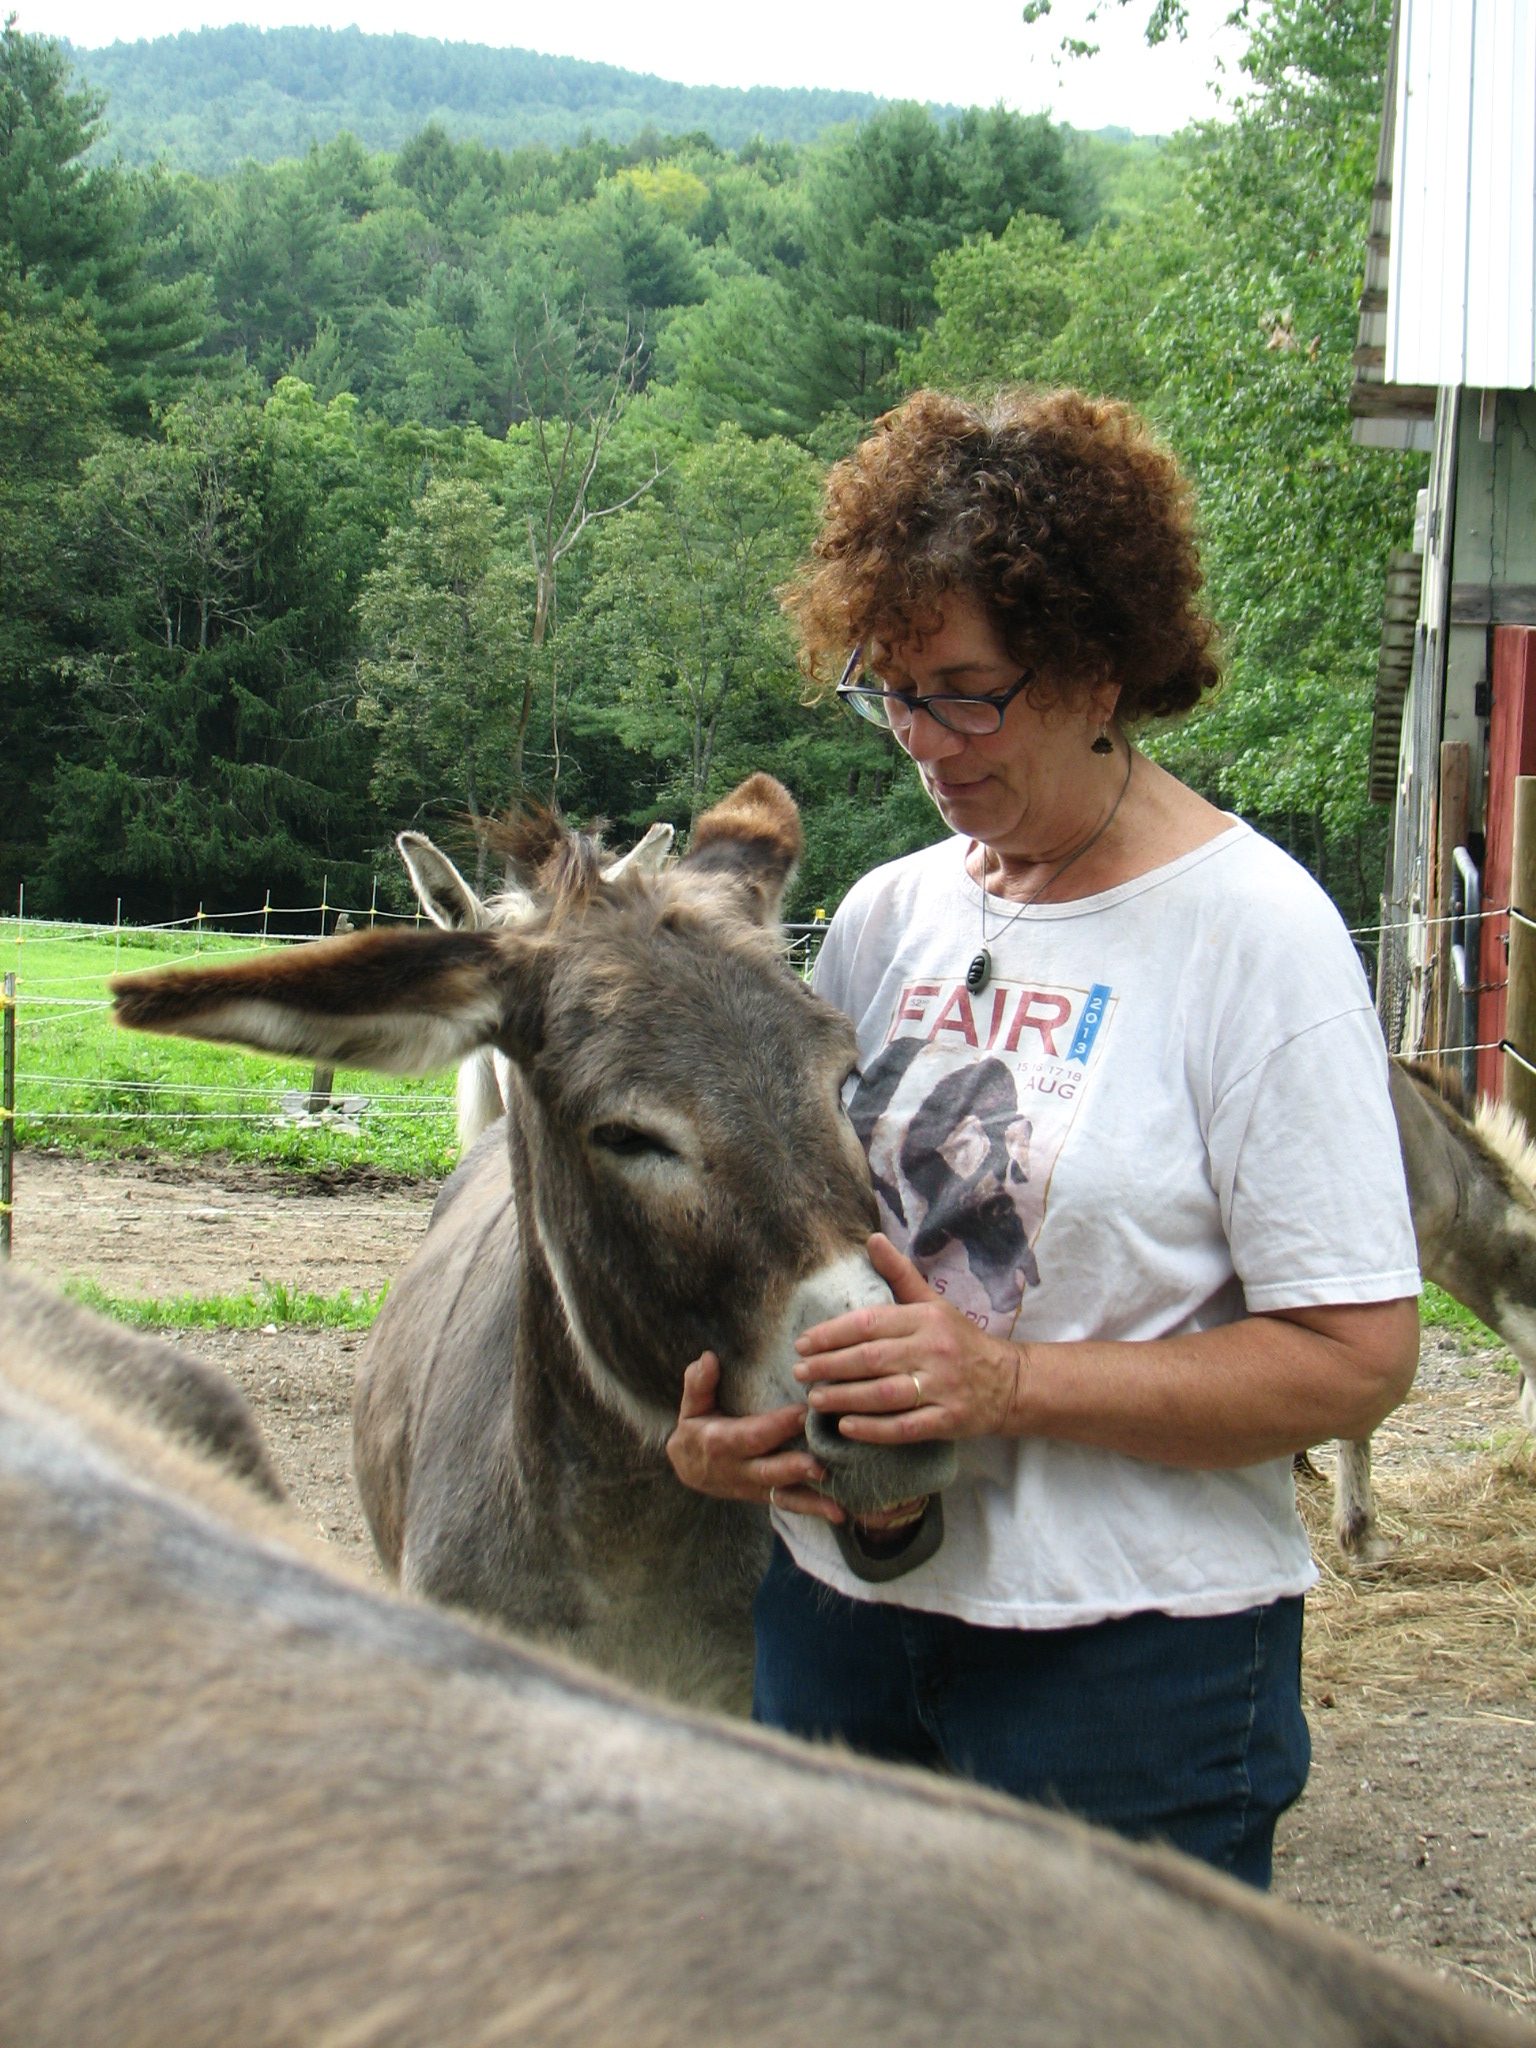 white woman with dark hair wearing a white t shirt touching the muzzle of a donkey leaning its head against her chest